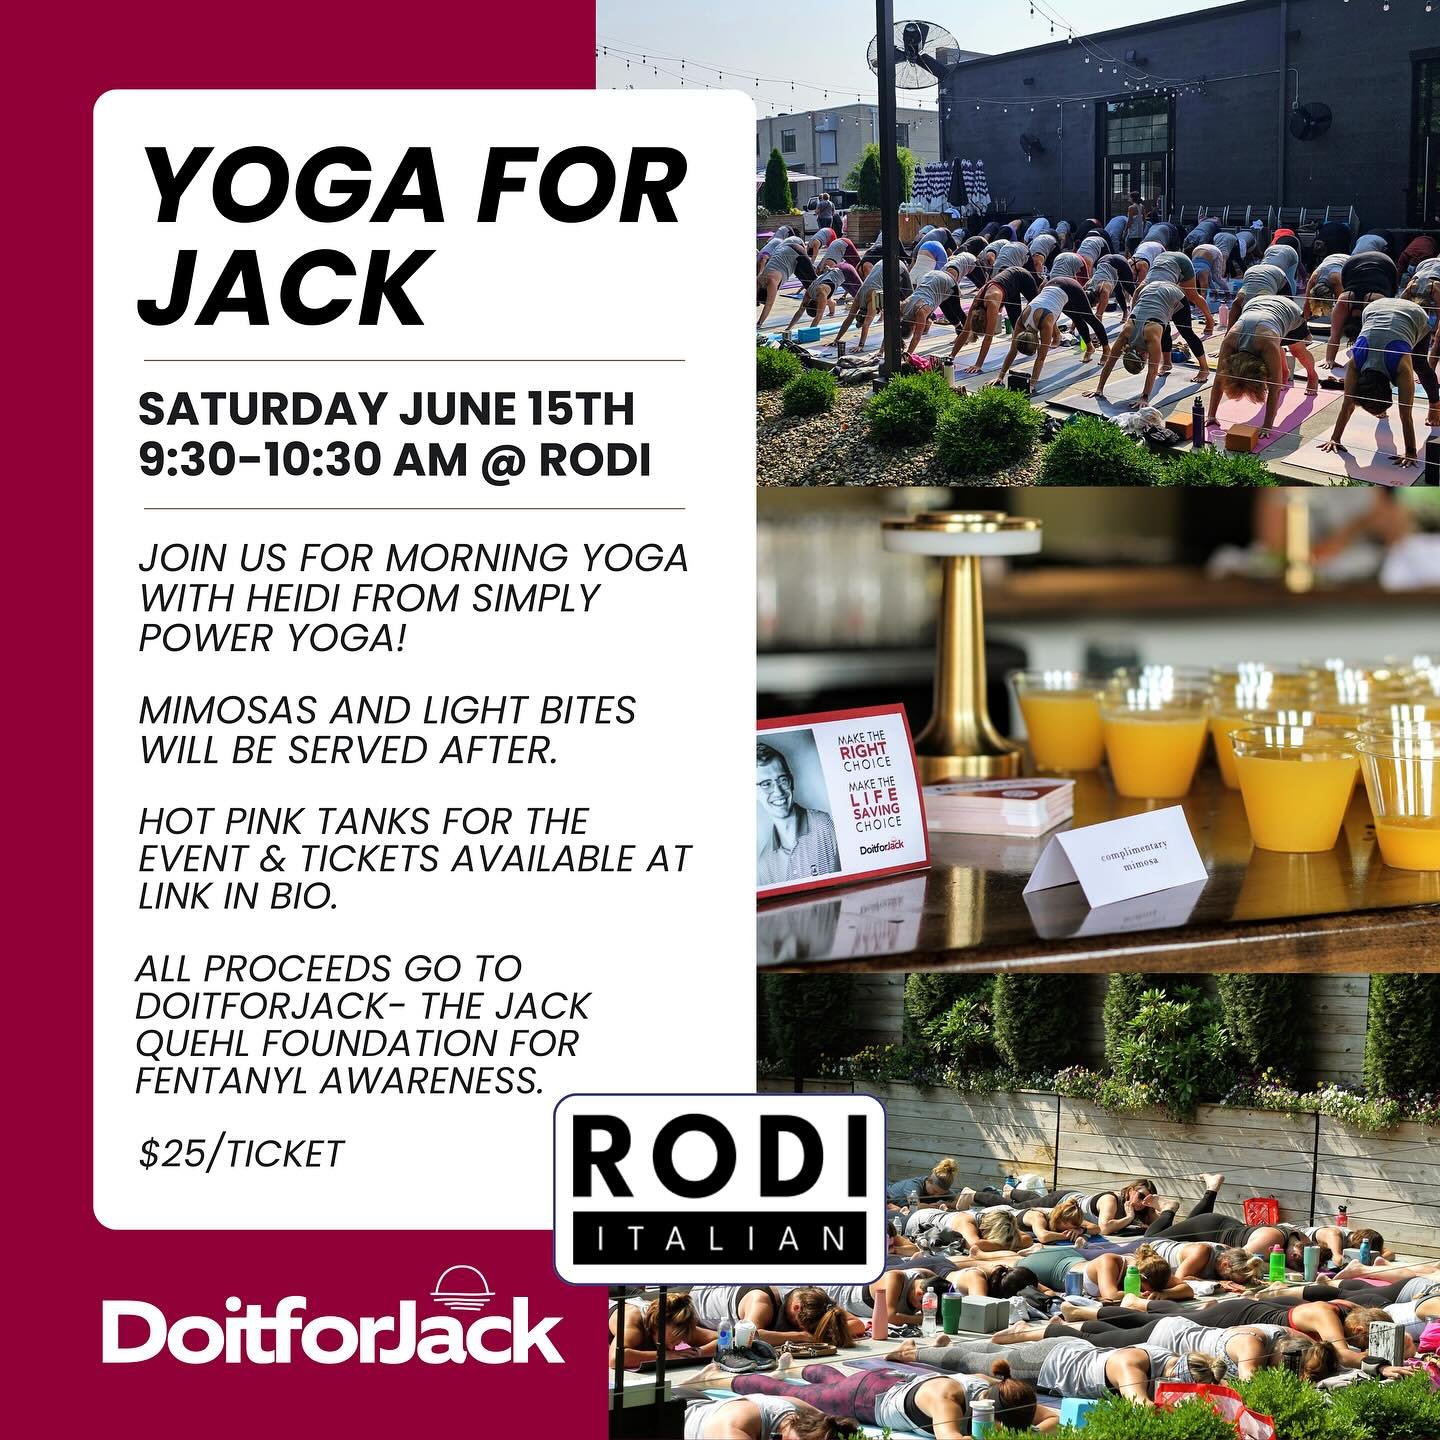 If you missed out on Yoga for Jack at Rodi last year, we highly recommend reserving your ticket ASAP because it was a HIT!

So let&rsquo;s do it again!  Heidi from @simplypoweryoga_north will be there!  And our good friends @rodiitalian will be makin